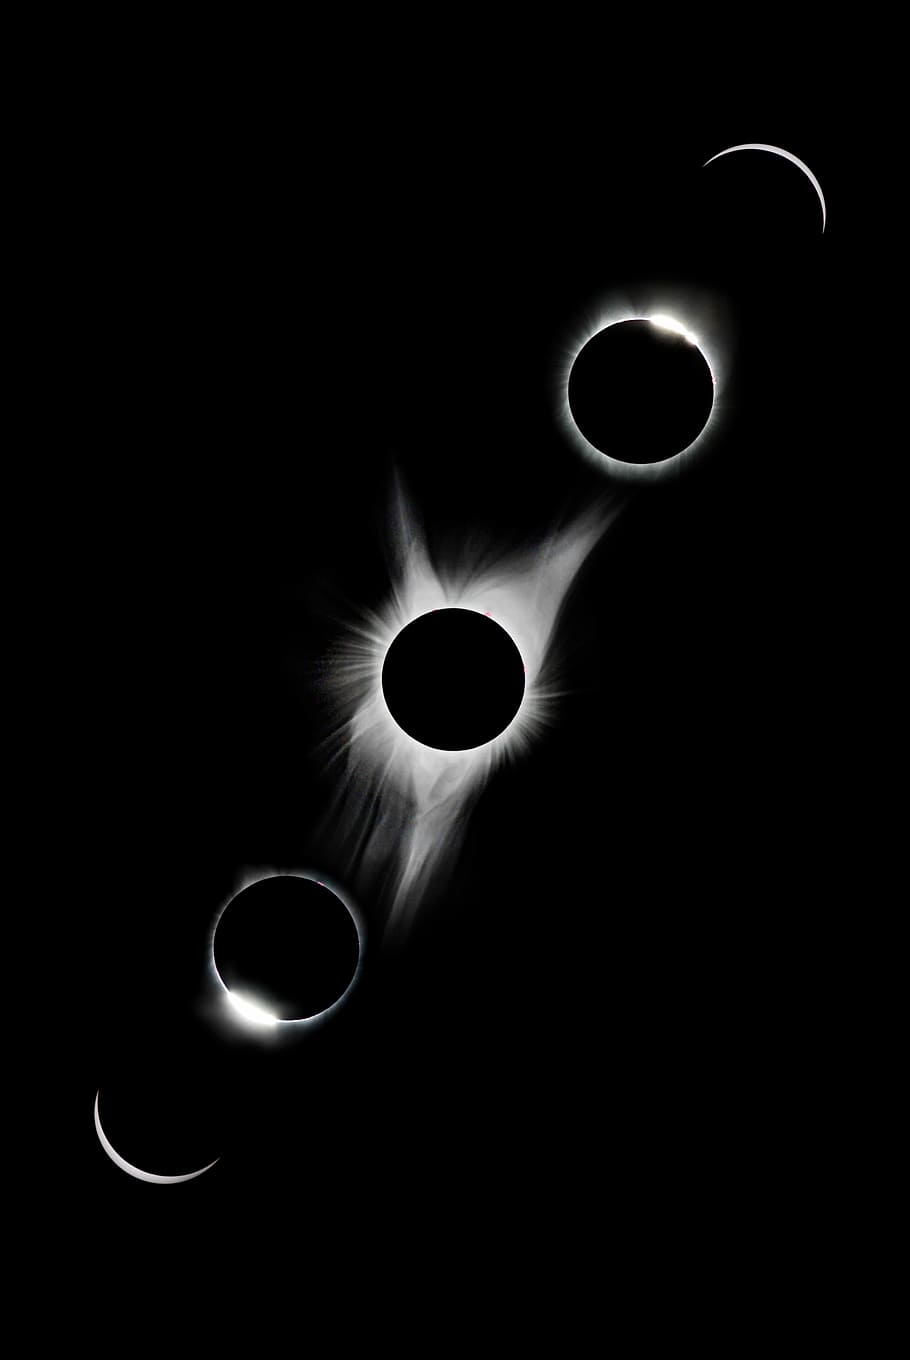 lunar eclipse, five eclipse phases, moon, moon eclipse, black and white